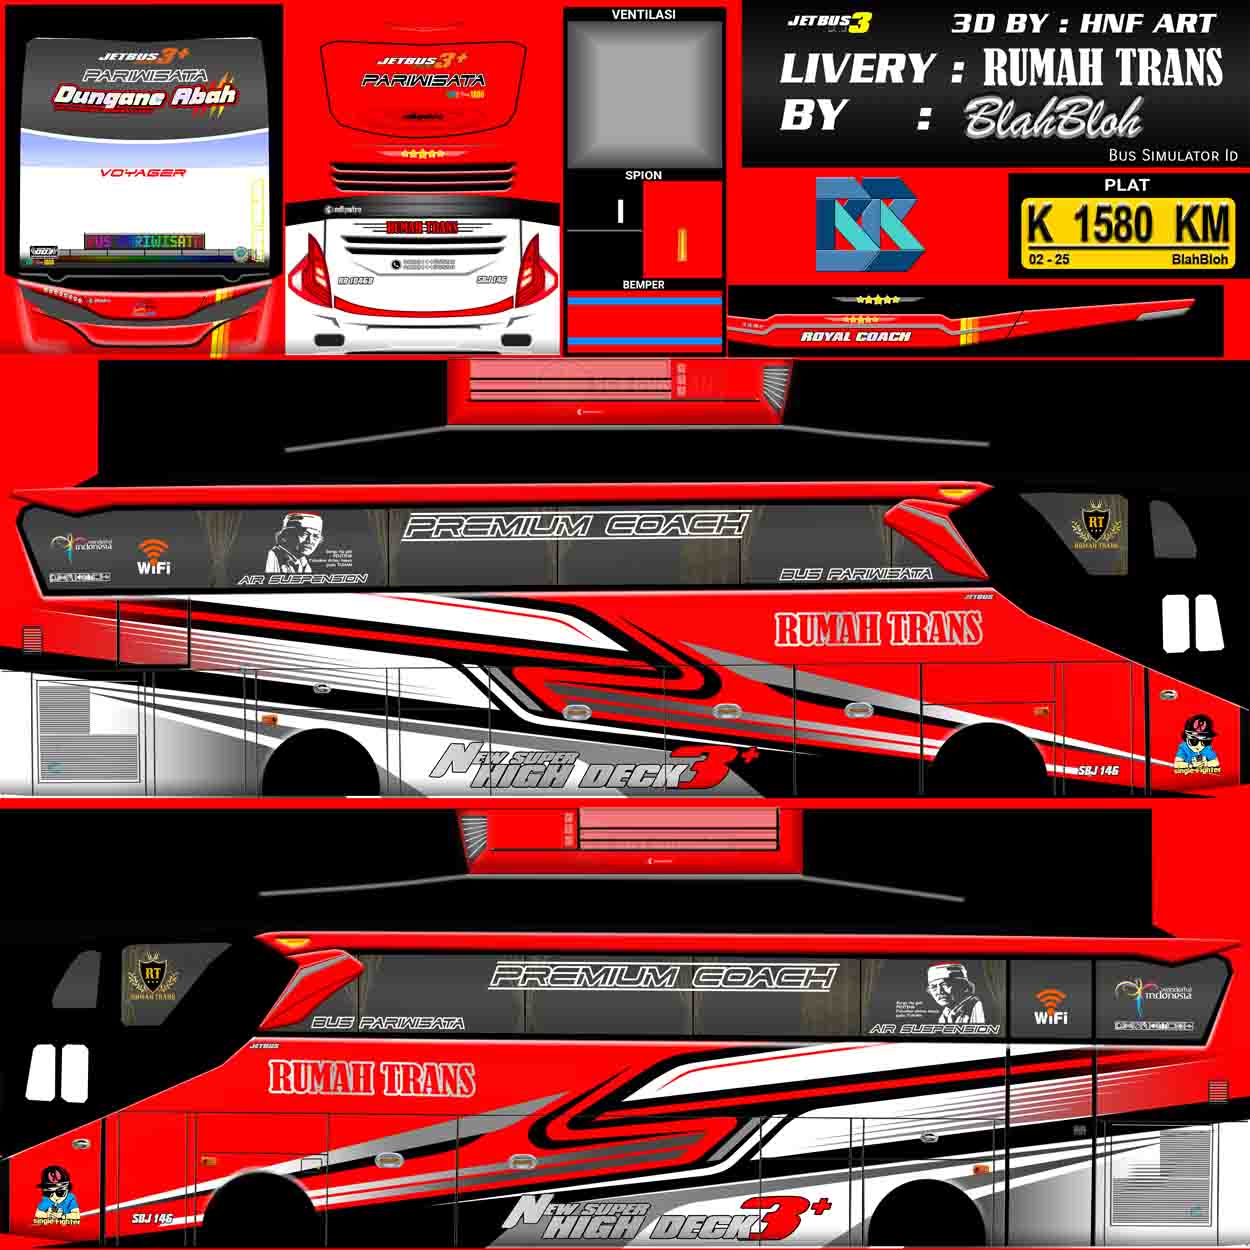 livery bussid dongane abah